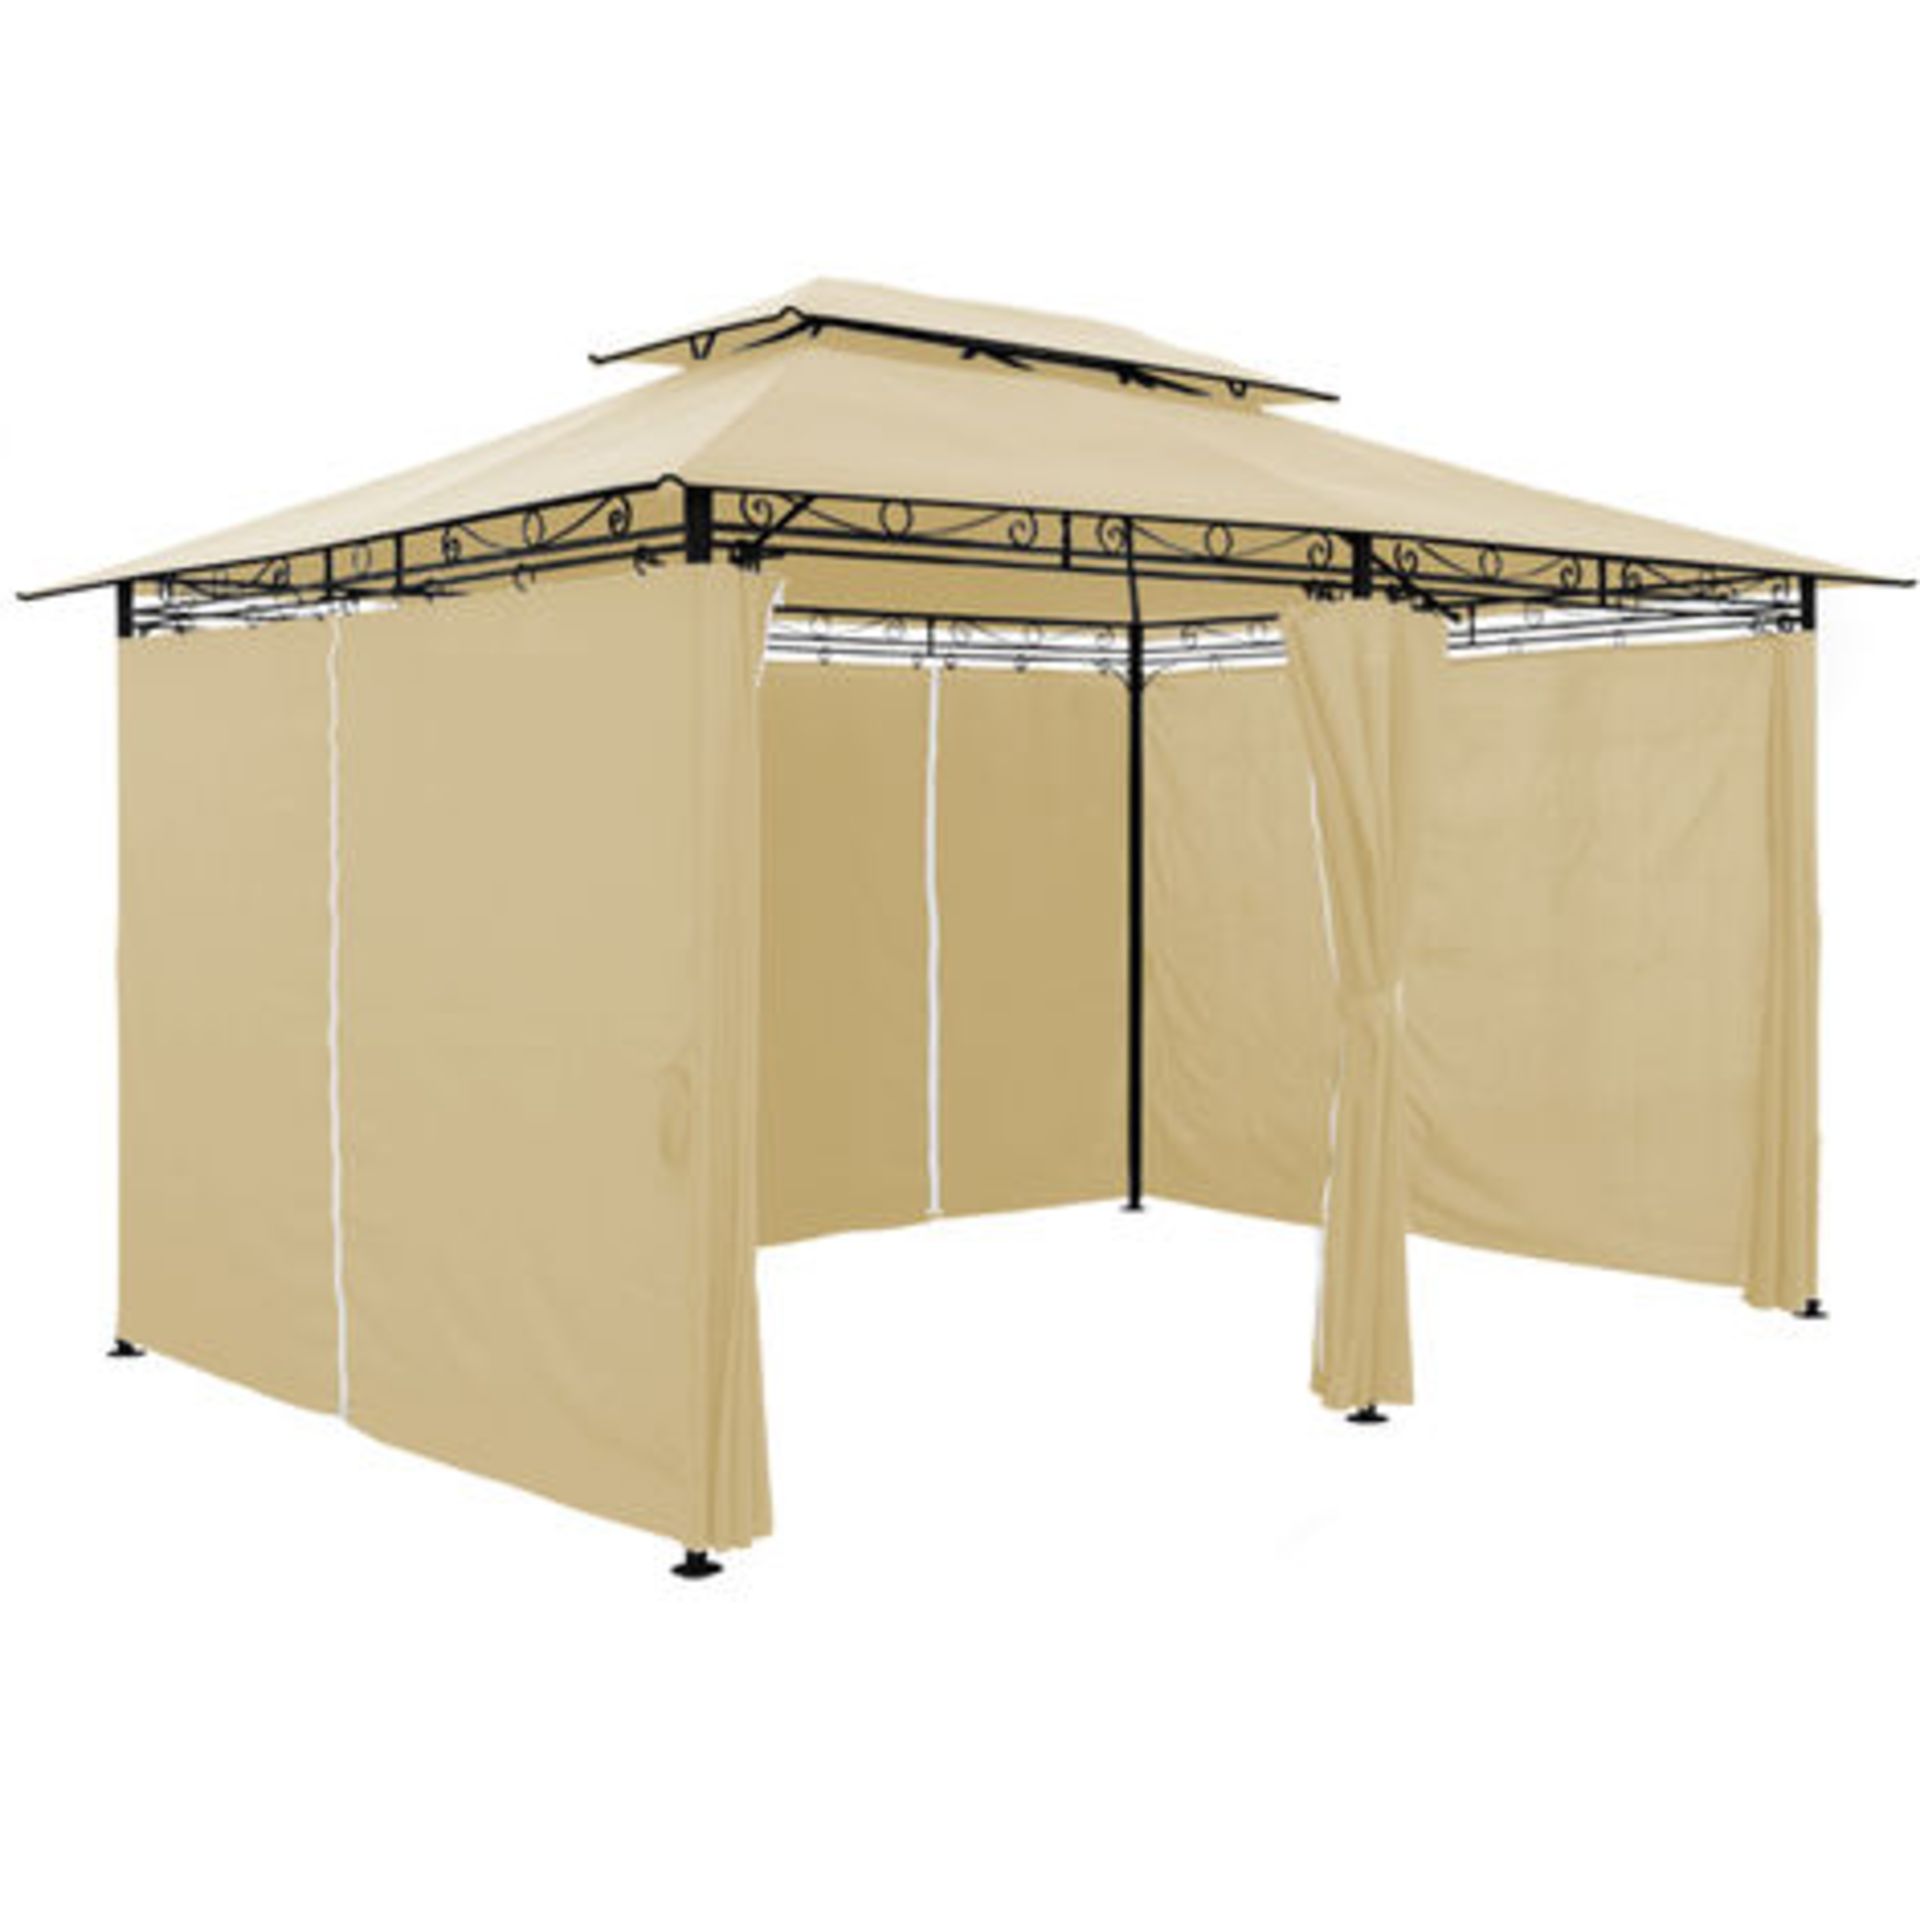 V Brand New 3m x 4m Cream Powder Coated Garden Canopy/Gazebo With Curtains And Integrated Air - Image 2 of 2